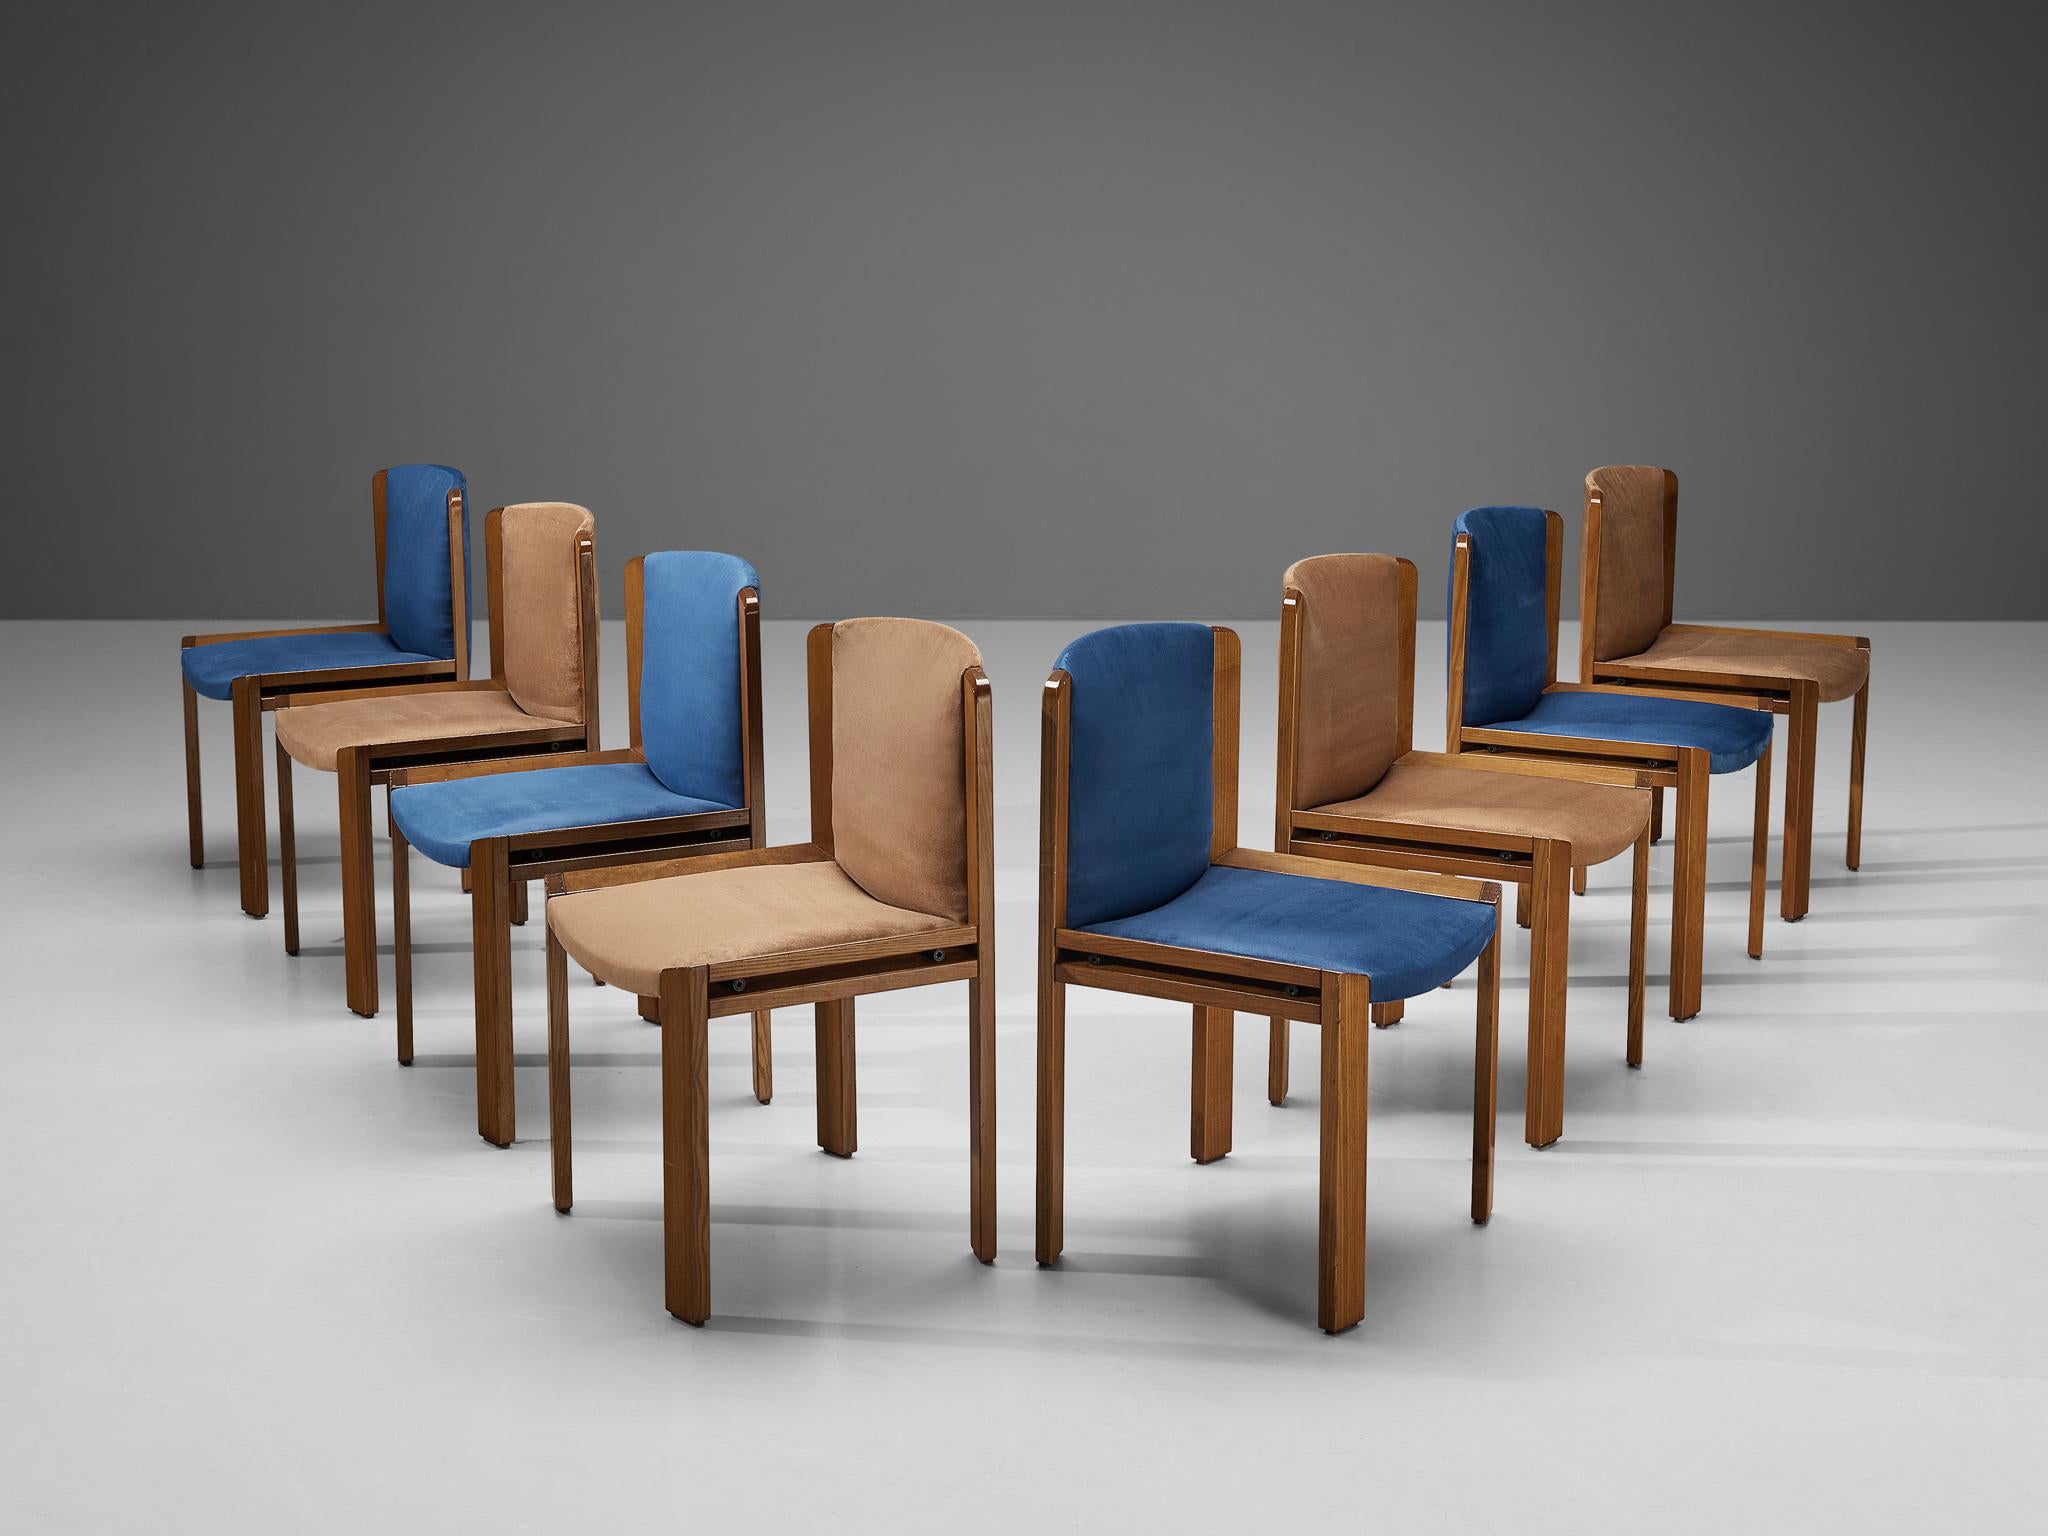 Joe Colombo for Pozzi, dining chairs model '300', fabric, ash, Italy, 1966.

Functionalist set of eight dining chairs is designed by Joe Colombo in 1966. Colombo's fascination with functionality meant he always focused on the user, which lead him